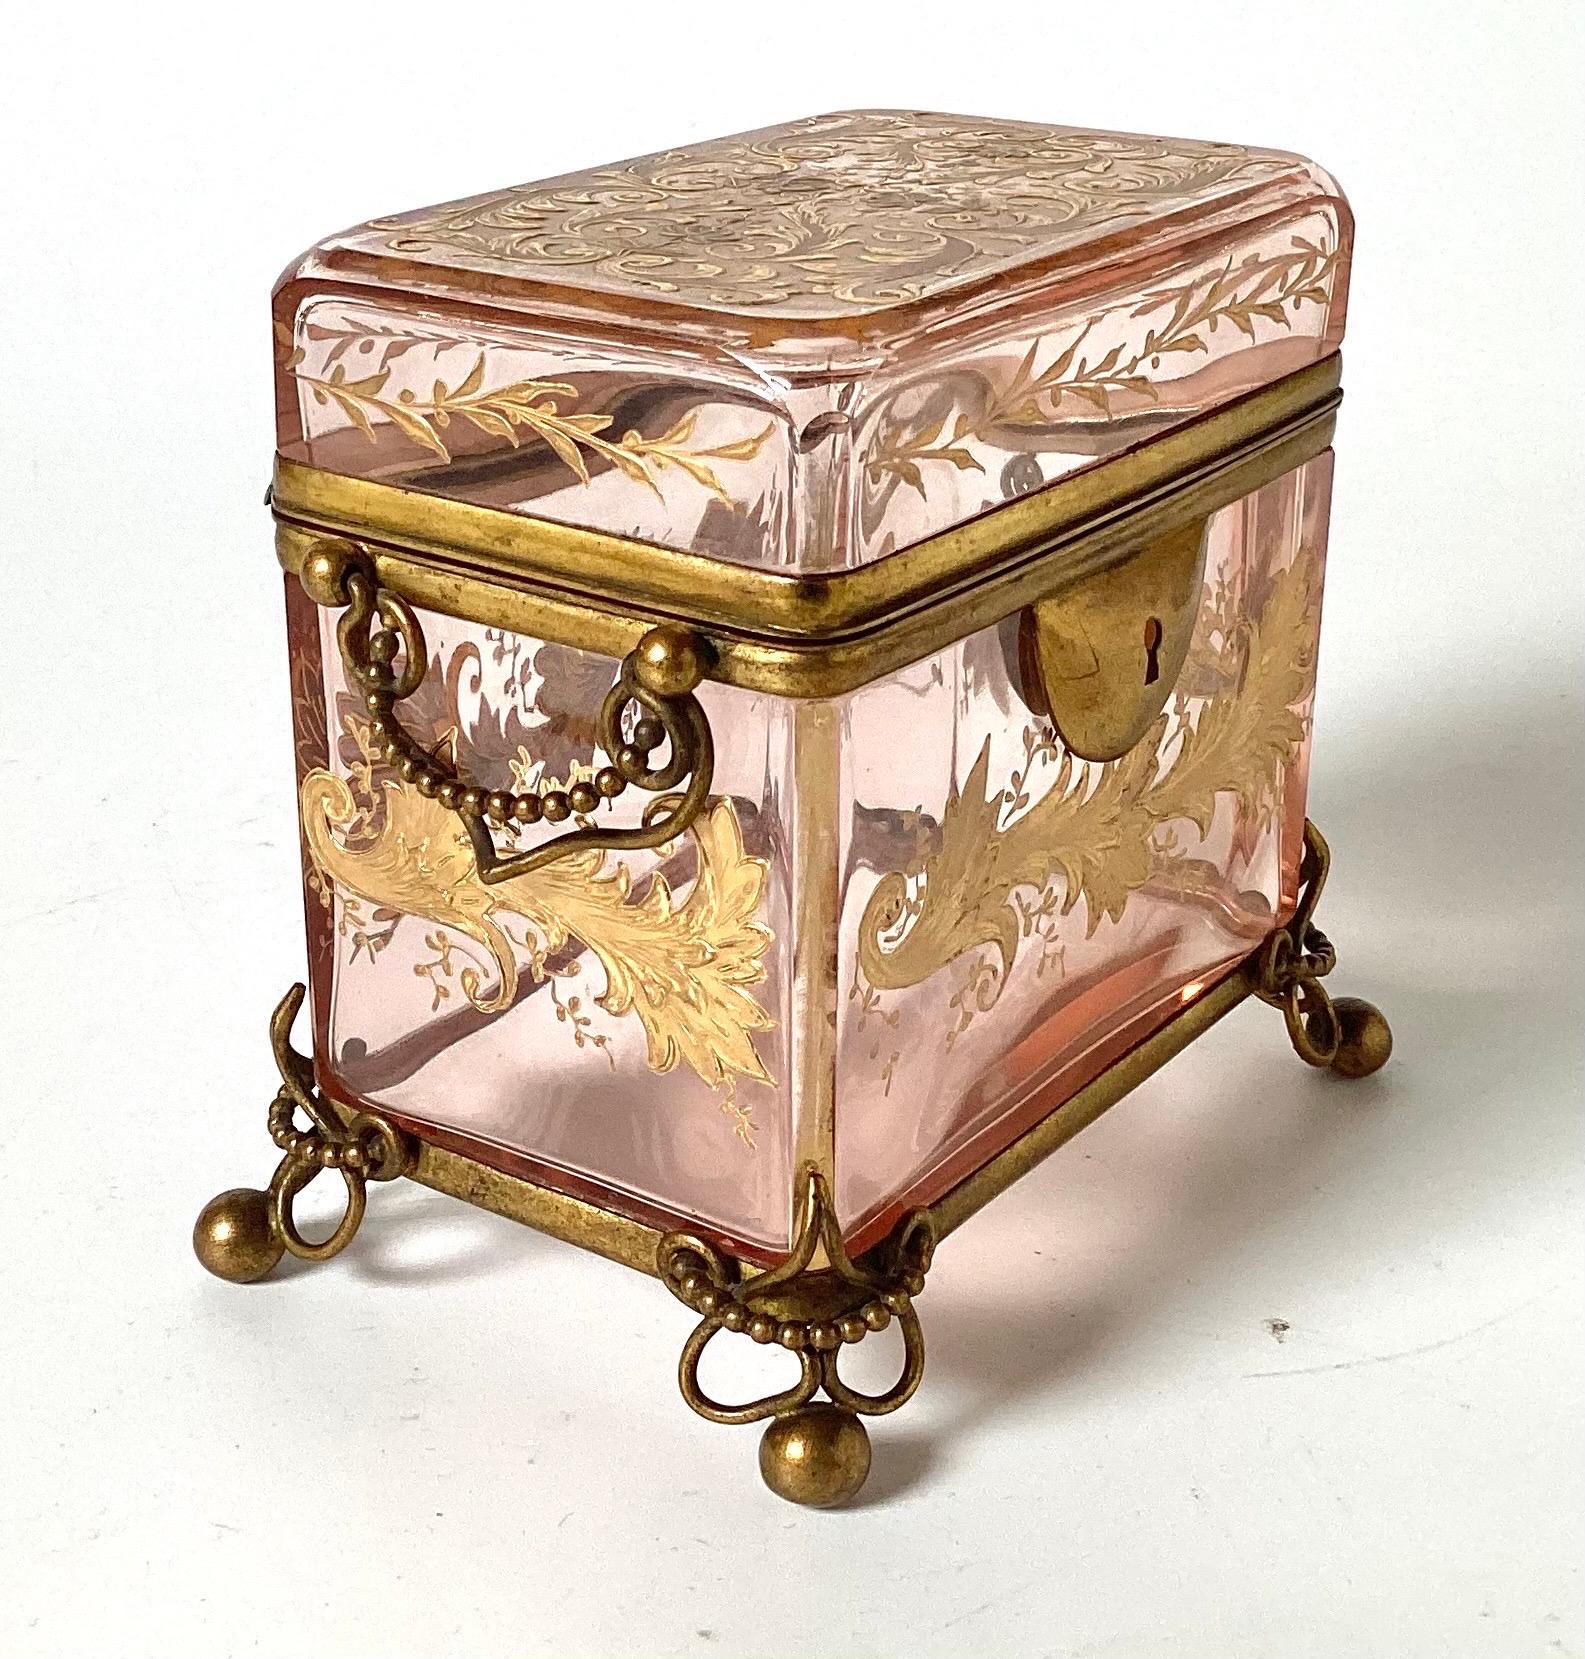 Early 1900's French Gilt Dresser Box With Gilt Brass Mounts And Handles
Different from most clear glass dresser boxes